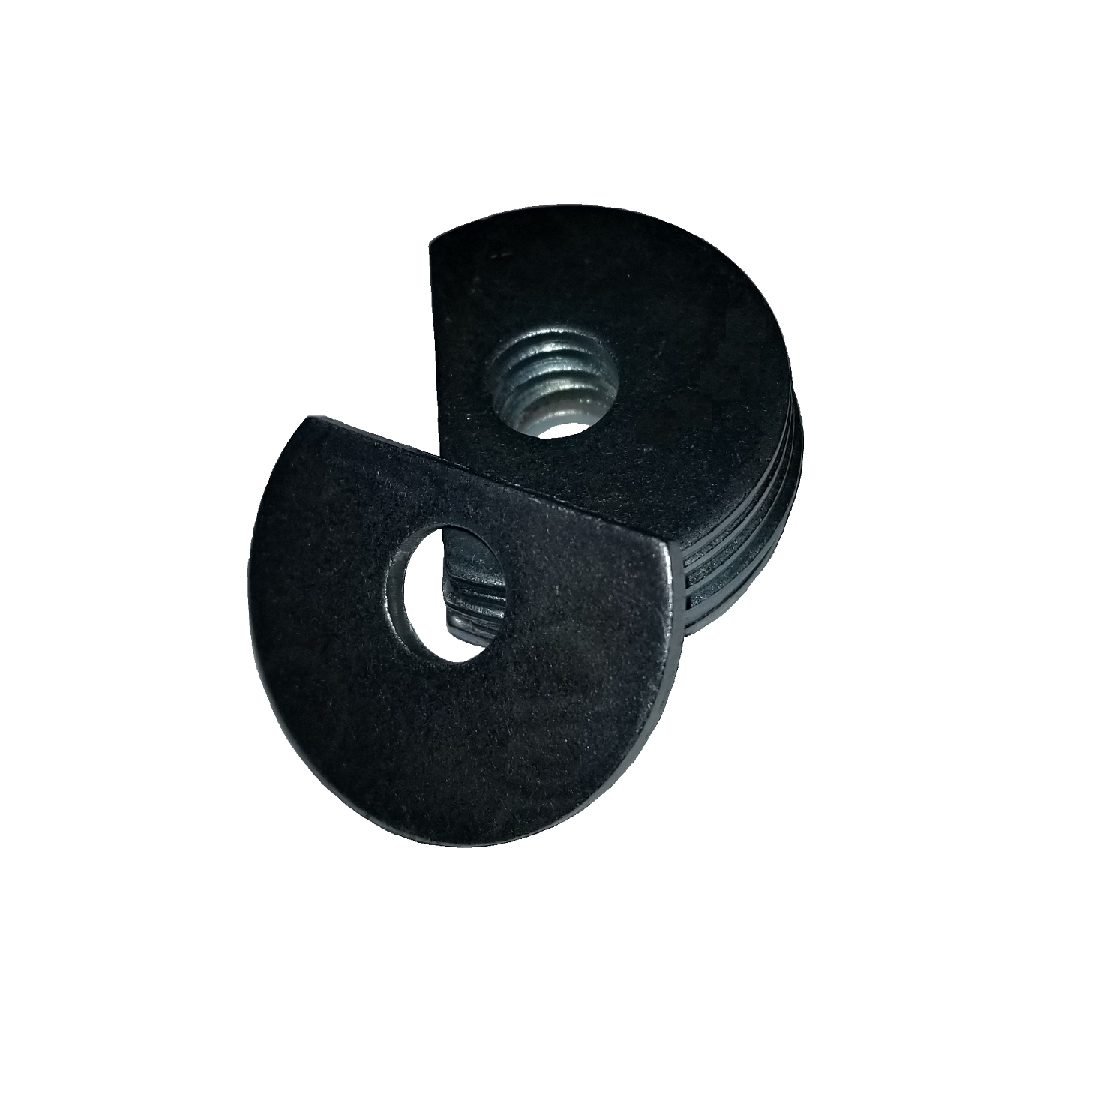 Clipped OD Washer - 0.812 ID, 1.469 OD, 0.134 Thick, Low Carbon Steel - Soft